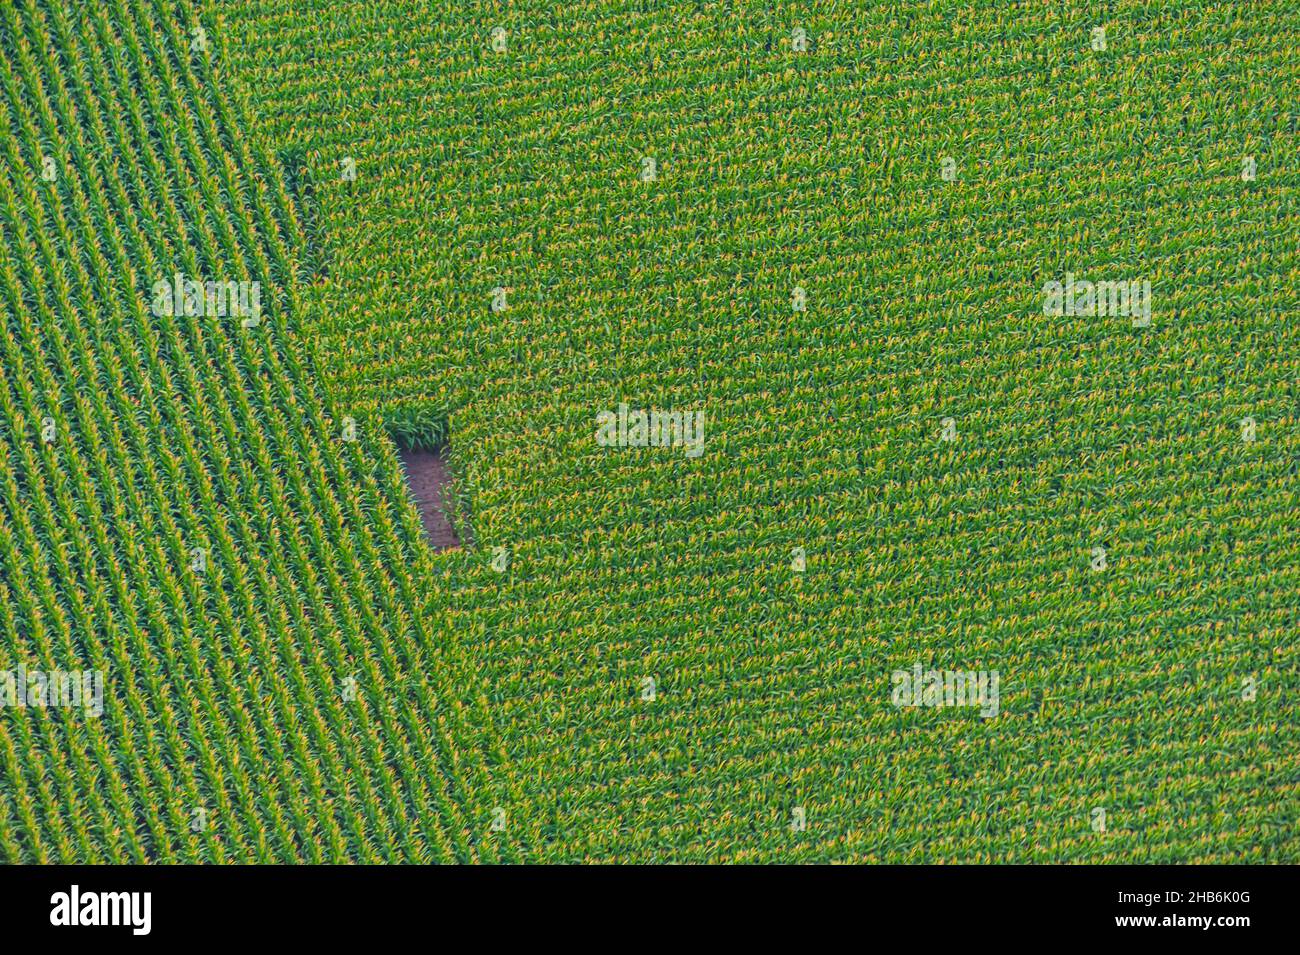 Indian corn, maize (Zea mays), maize field from above, aerial, view, Germany, Schleswig-Holstein Stock Photo